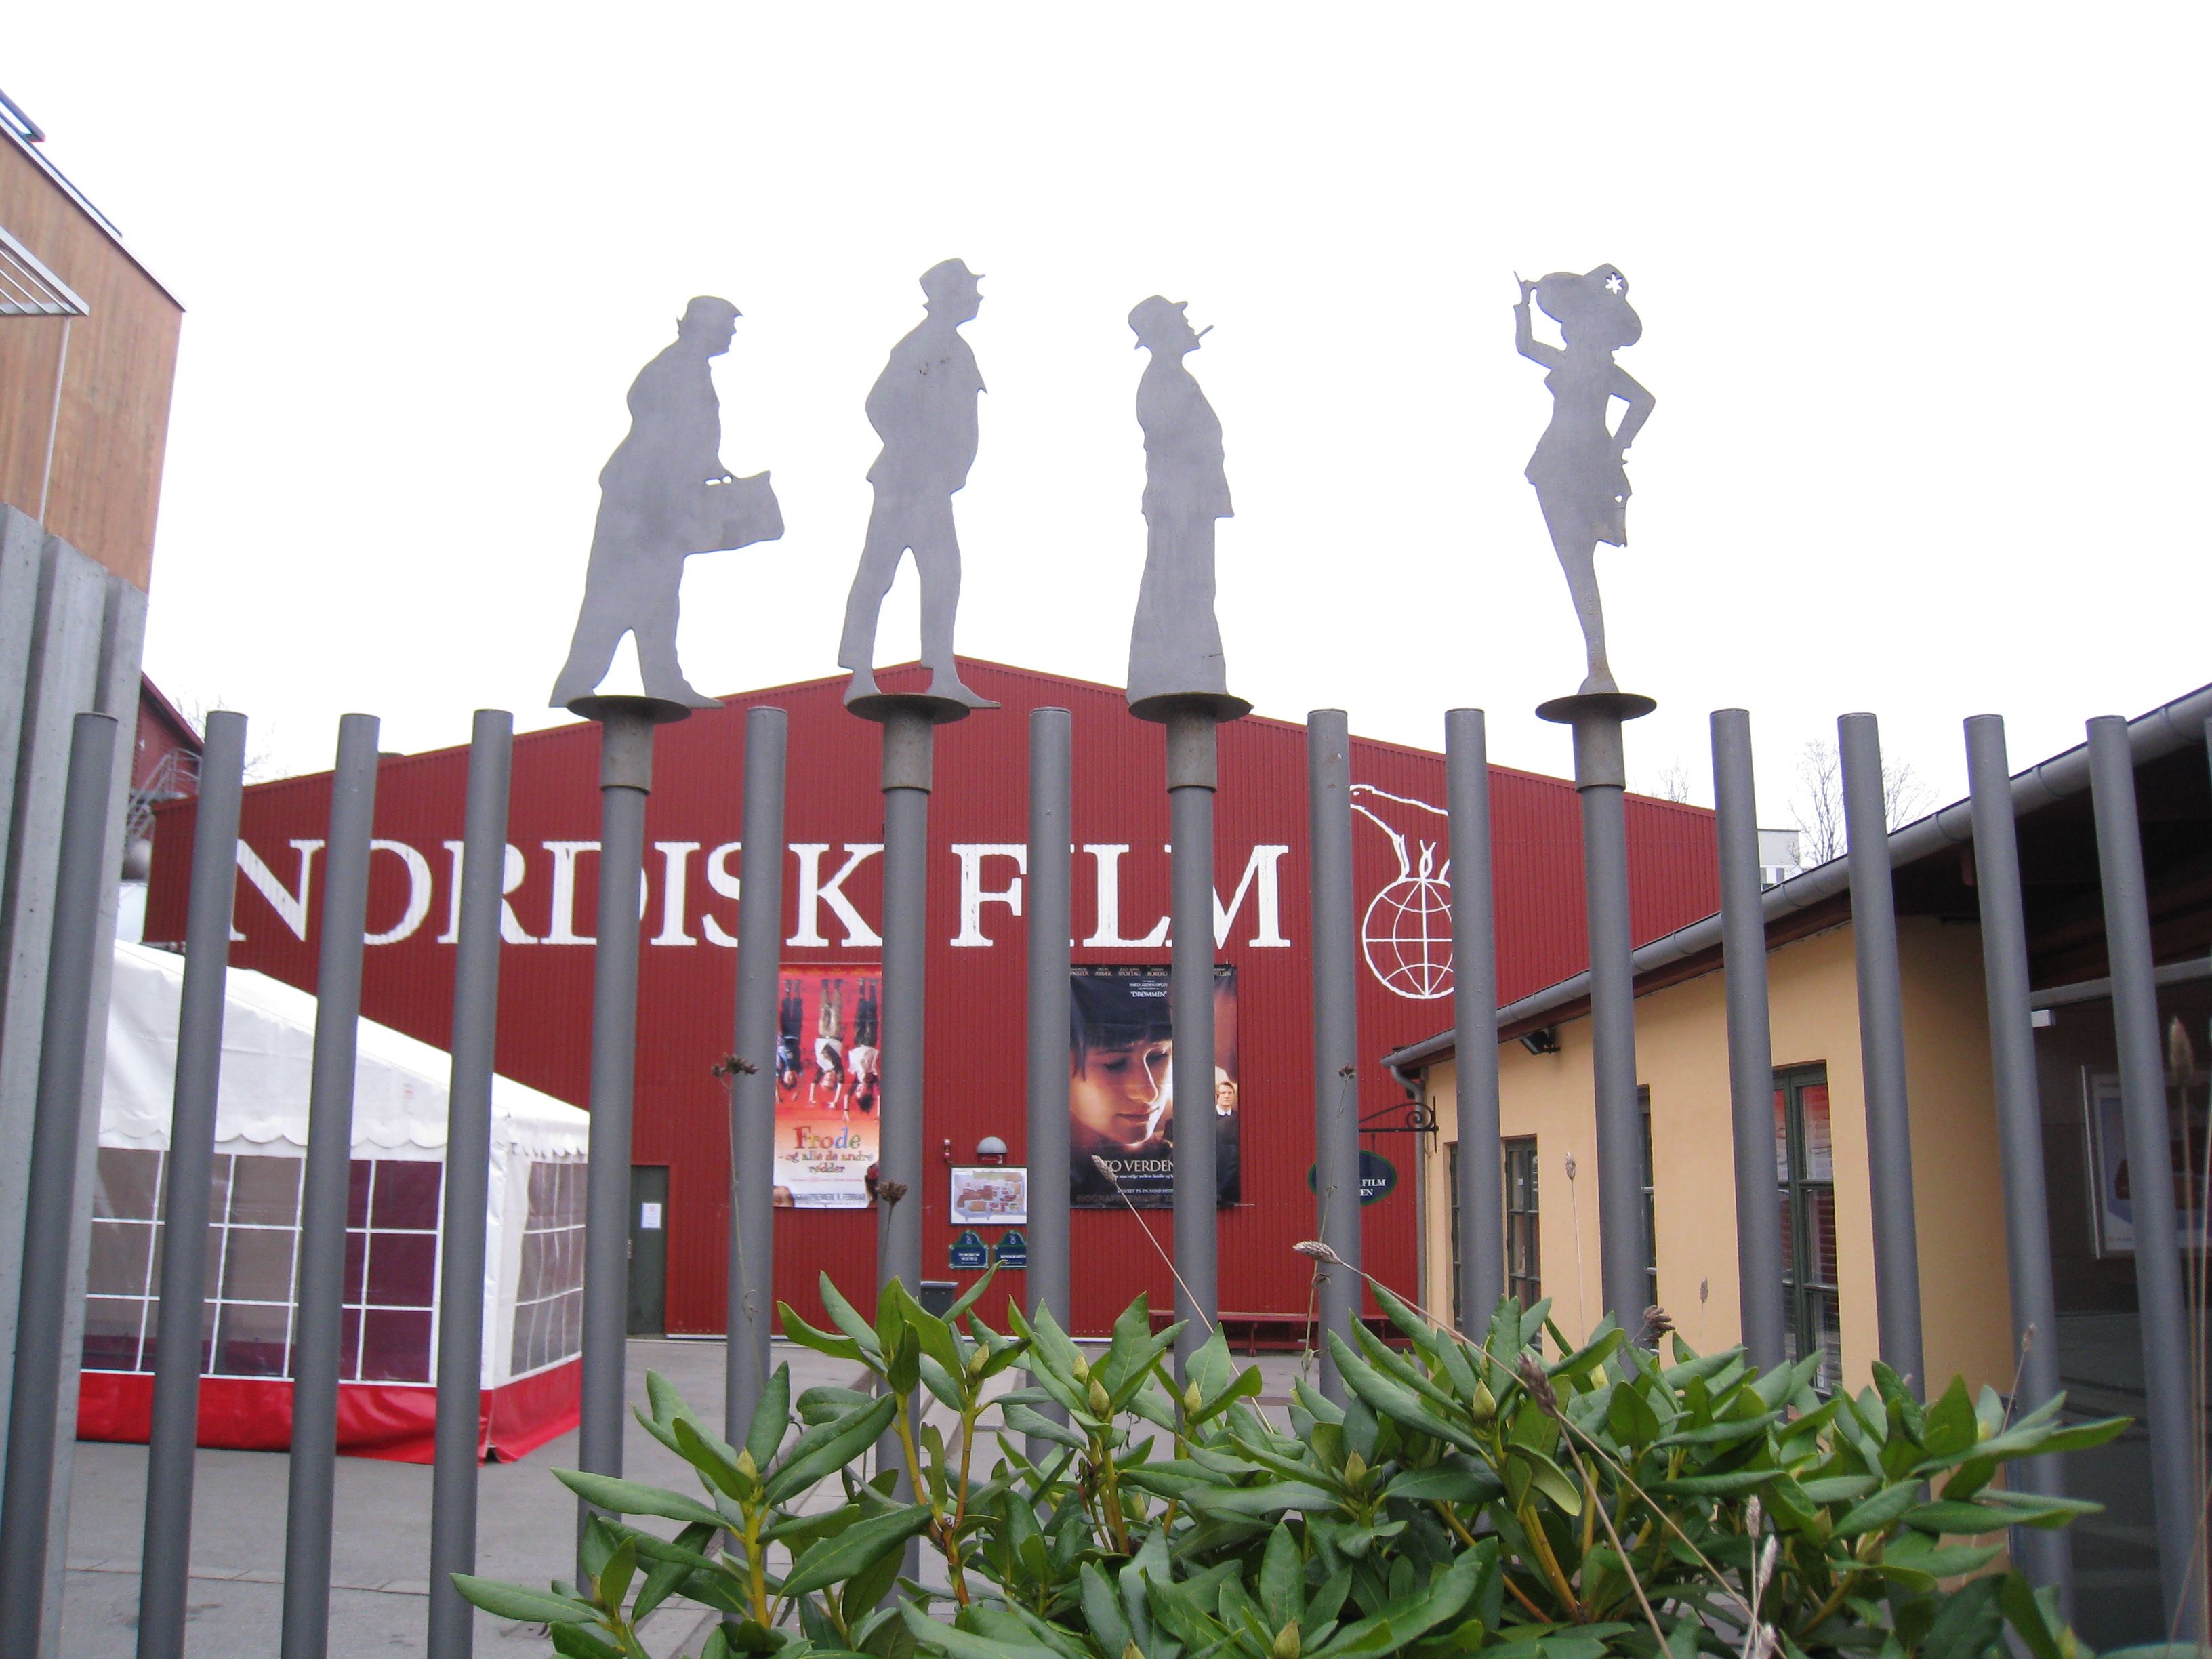 Today’s Date: Nordisk Film founded